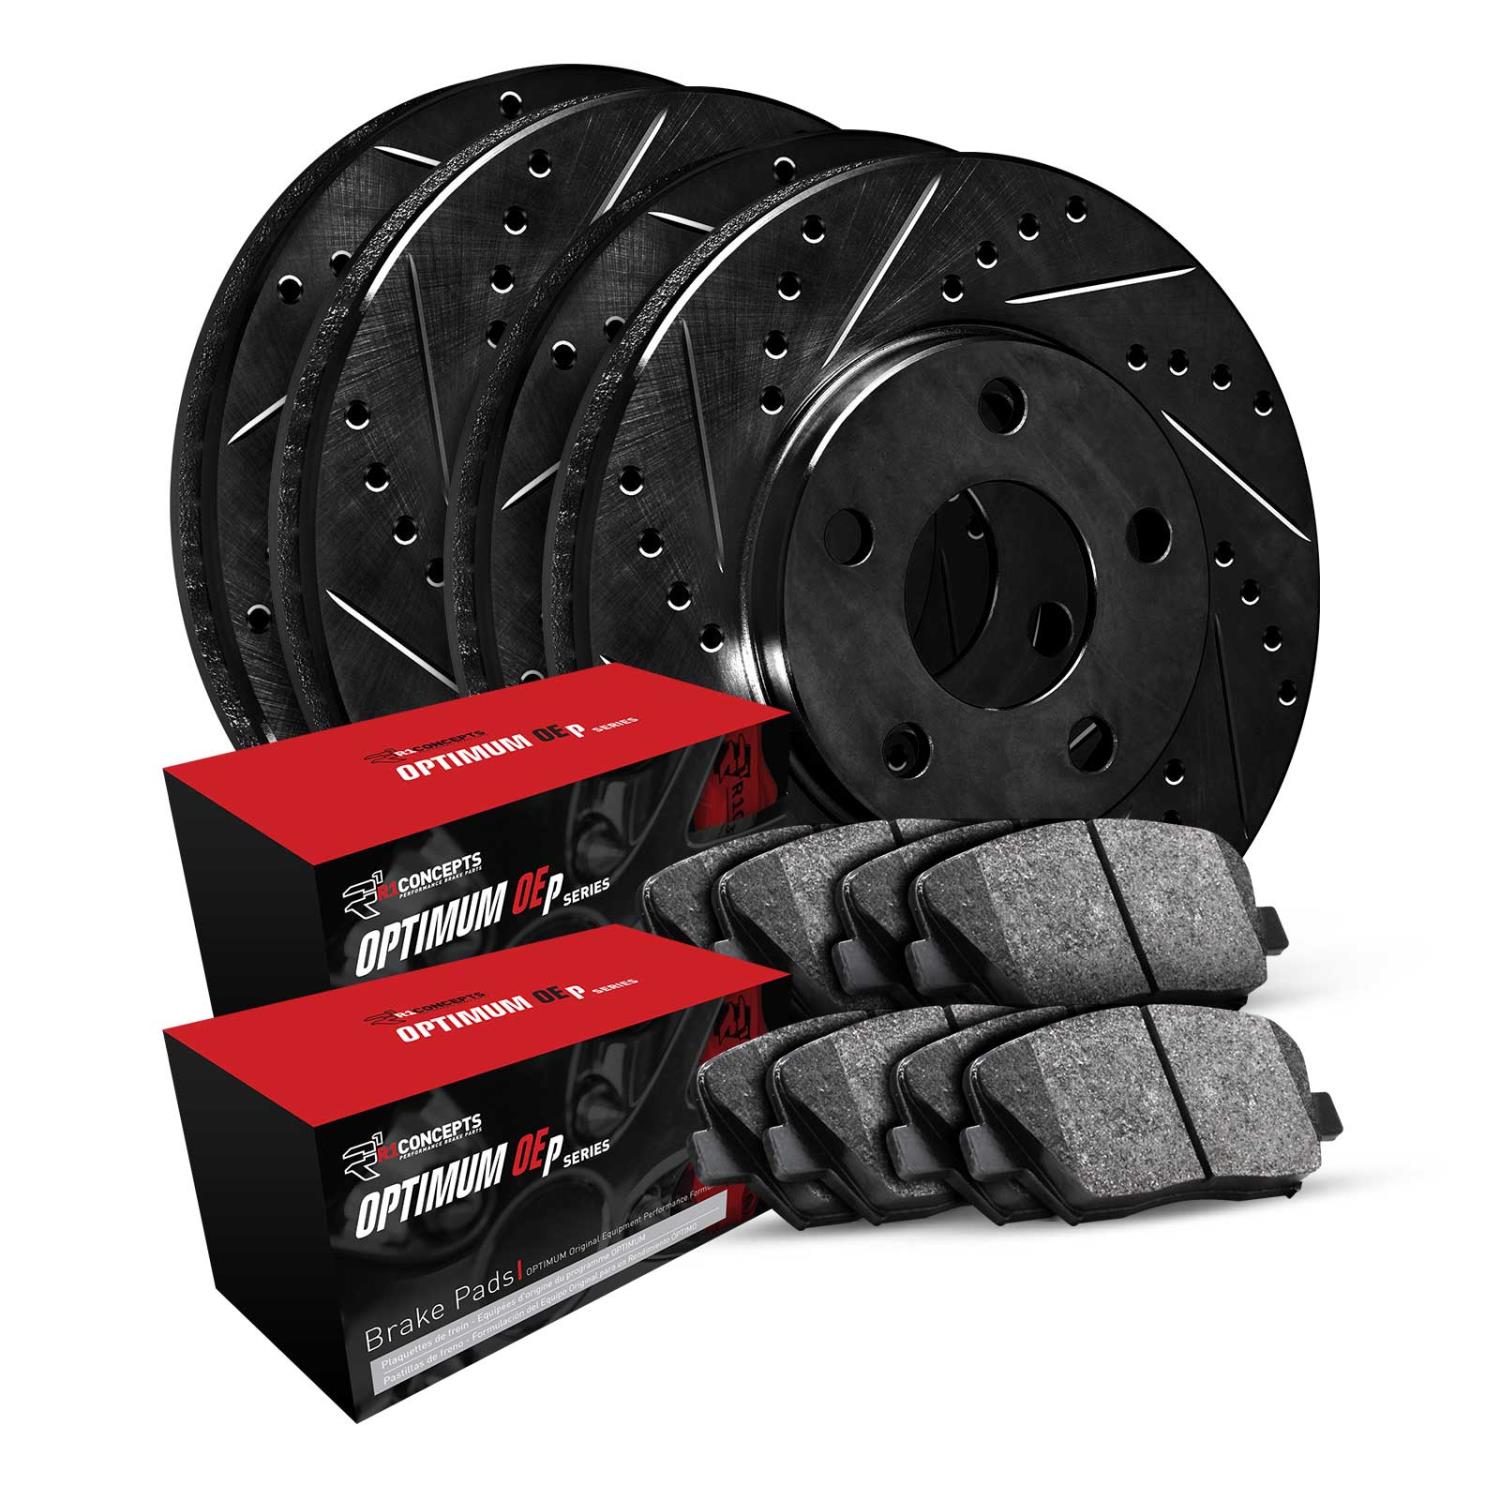 E-Line Drilled & Slotted Black Brake Rotor & Drum Set w/Optimum OE Pads & Shoes, 2003-2008 Fits Multiple Makes/Models